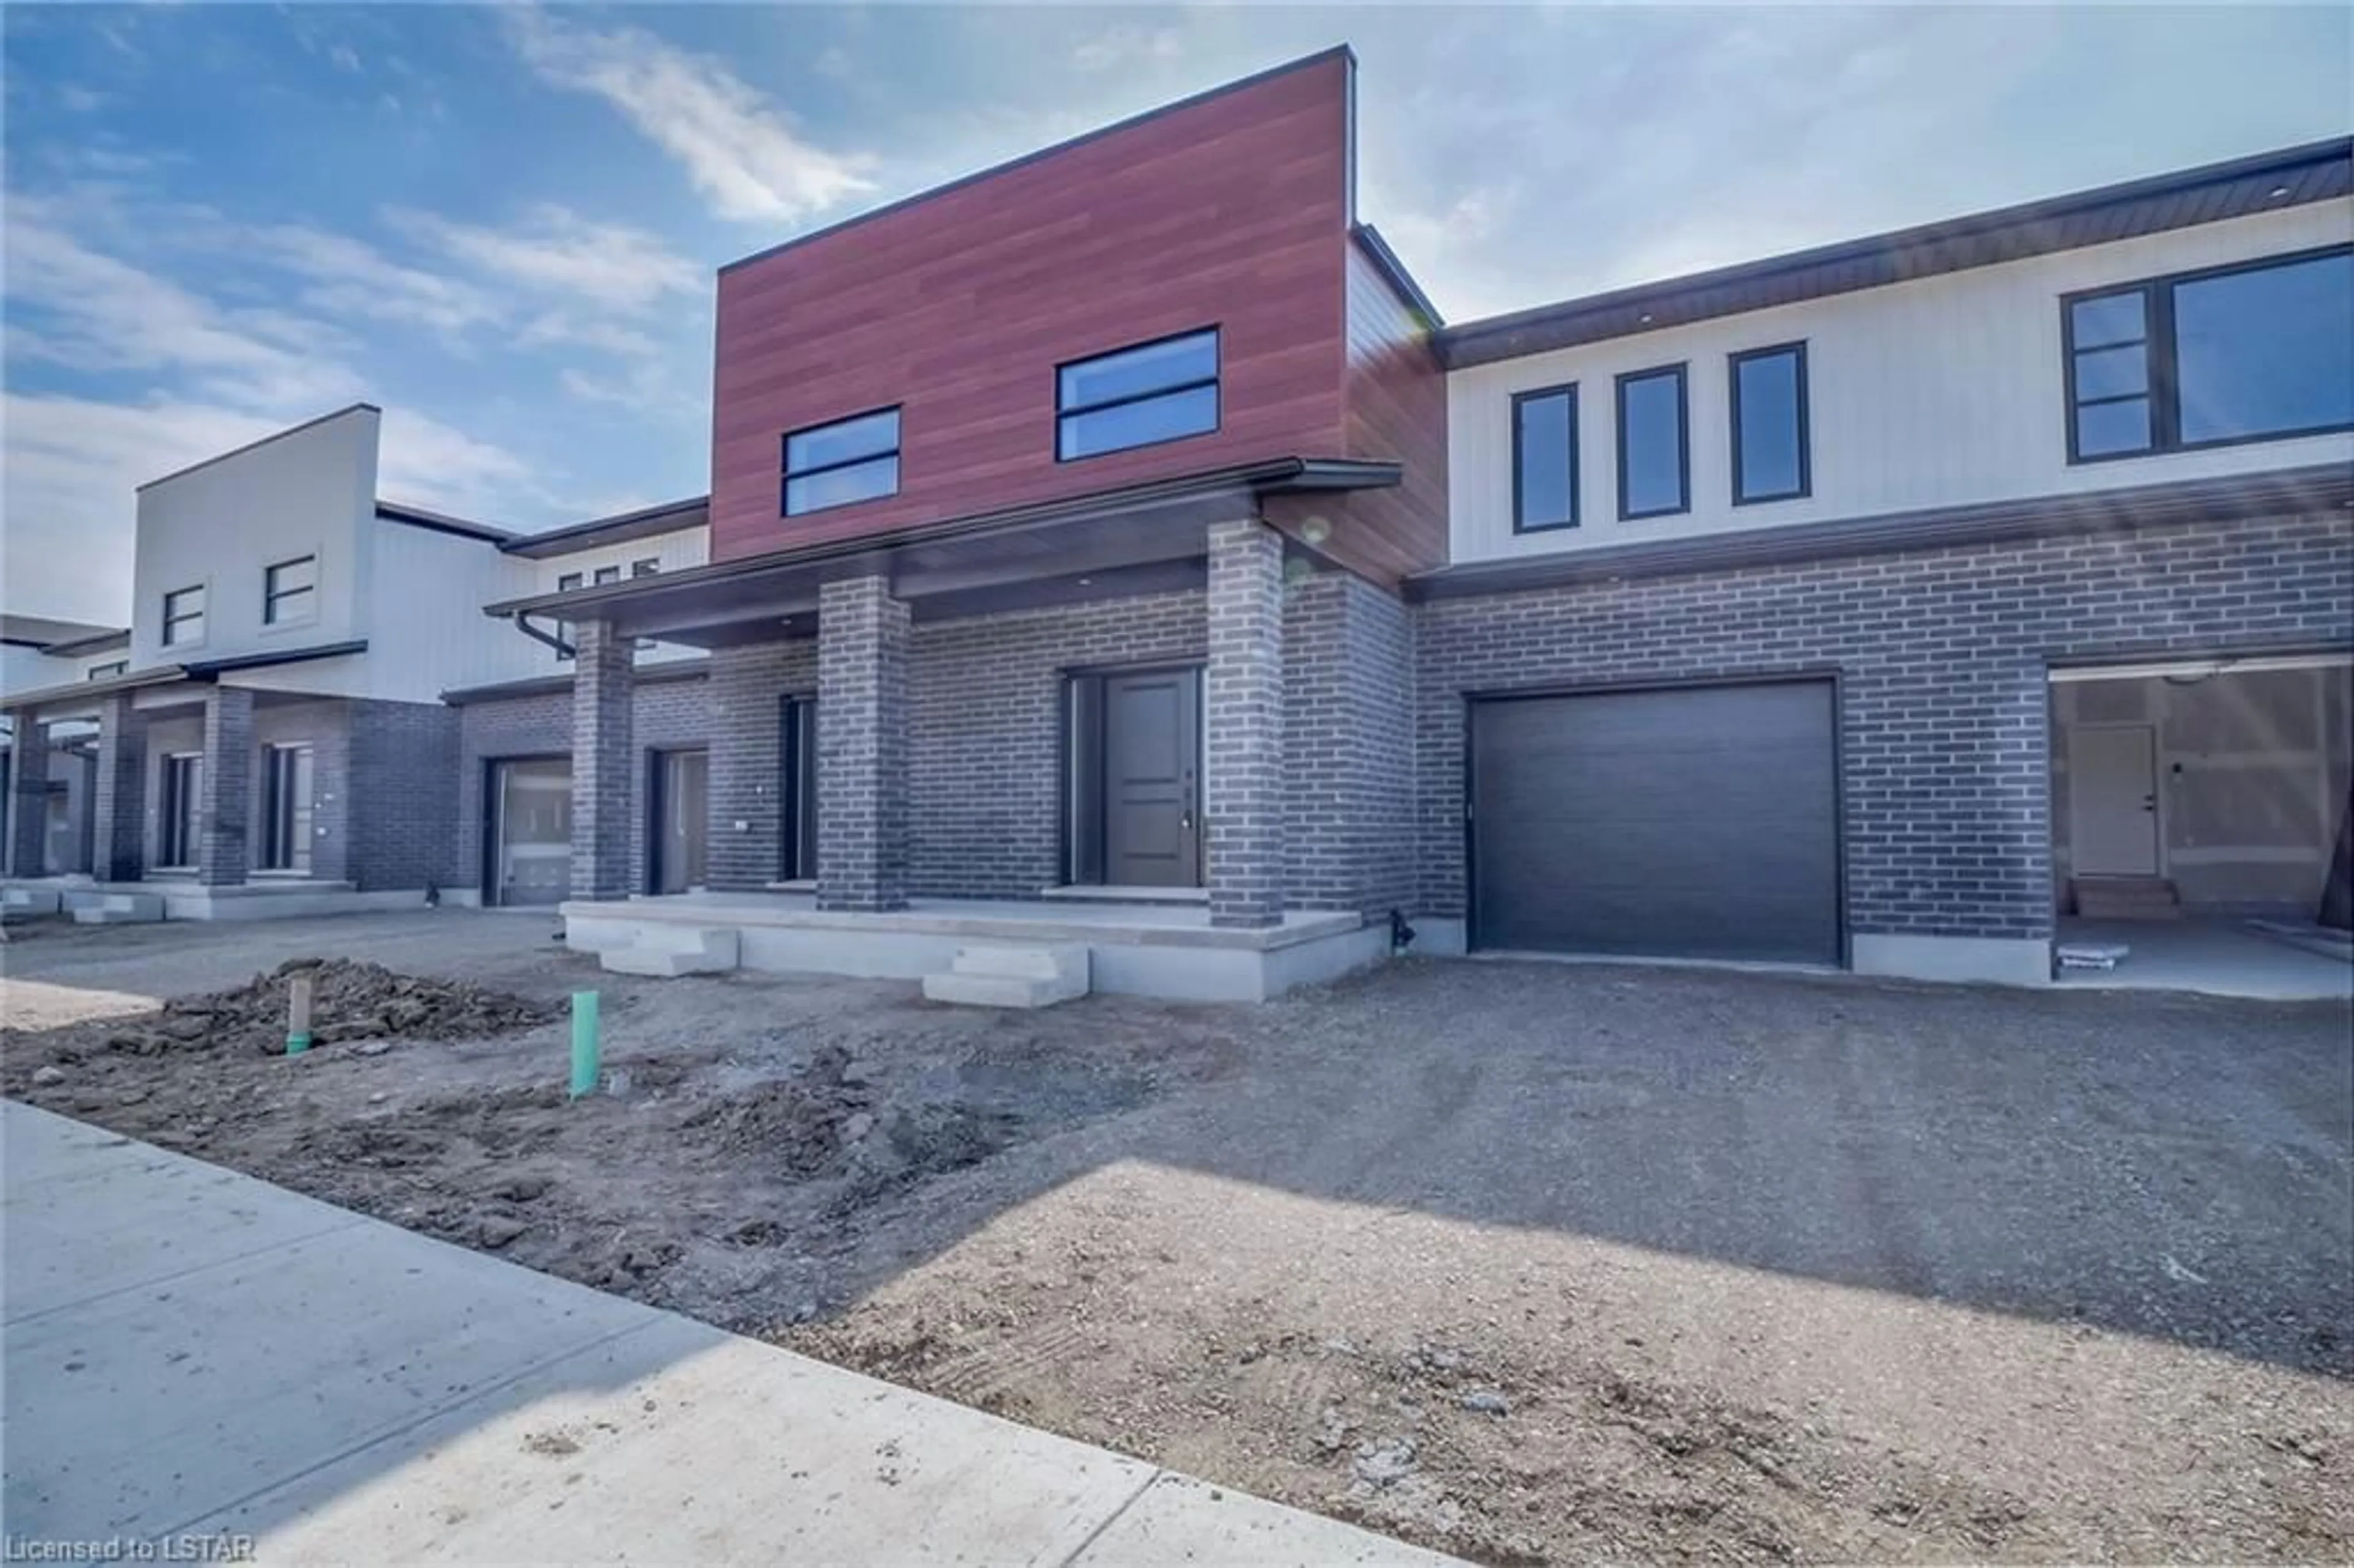 Home with brick exterior material for 6803 Royal Magnolia Ave, London Ontario N6P 0J6